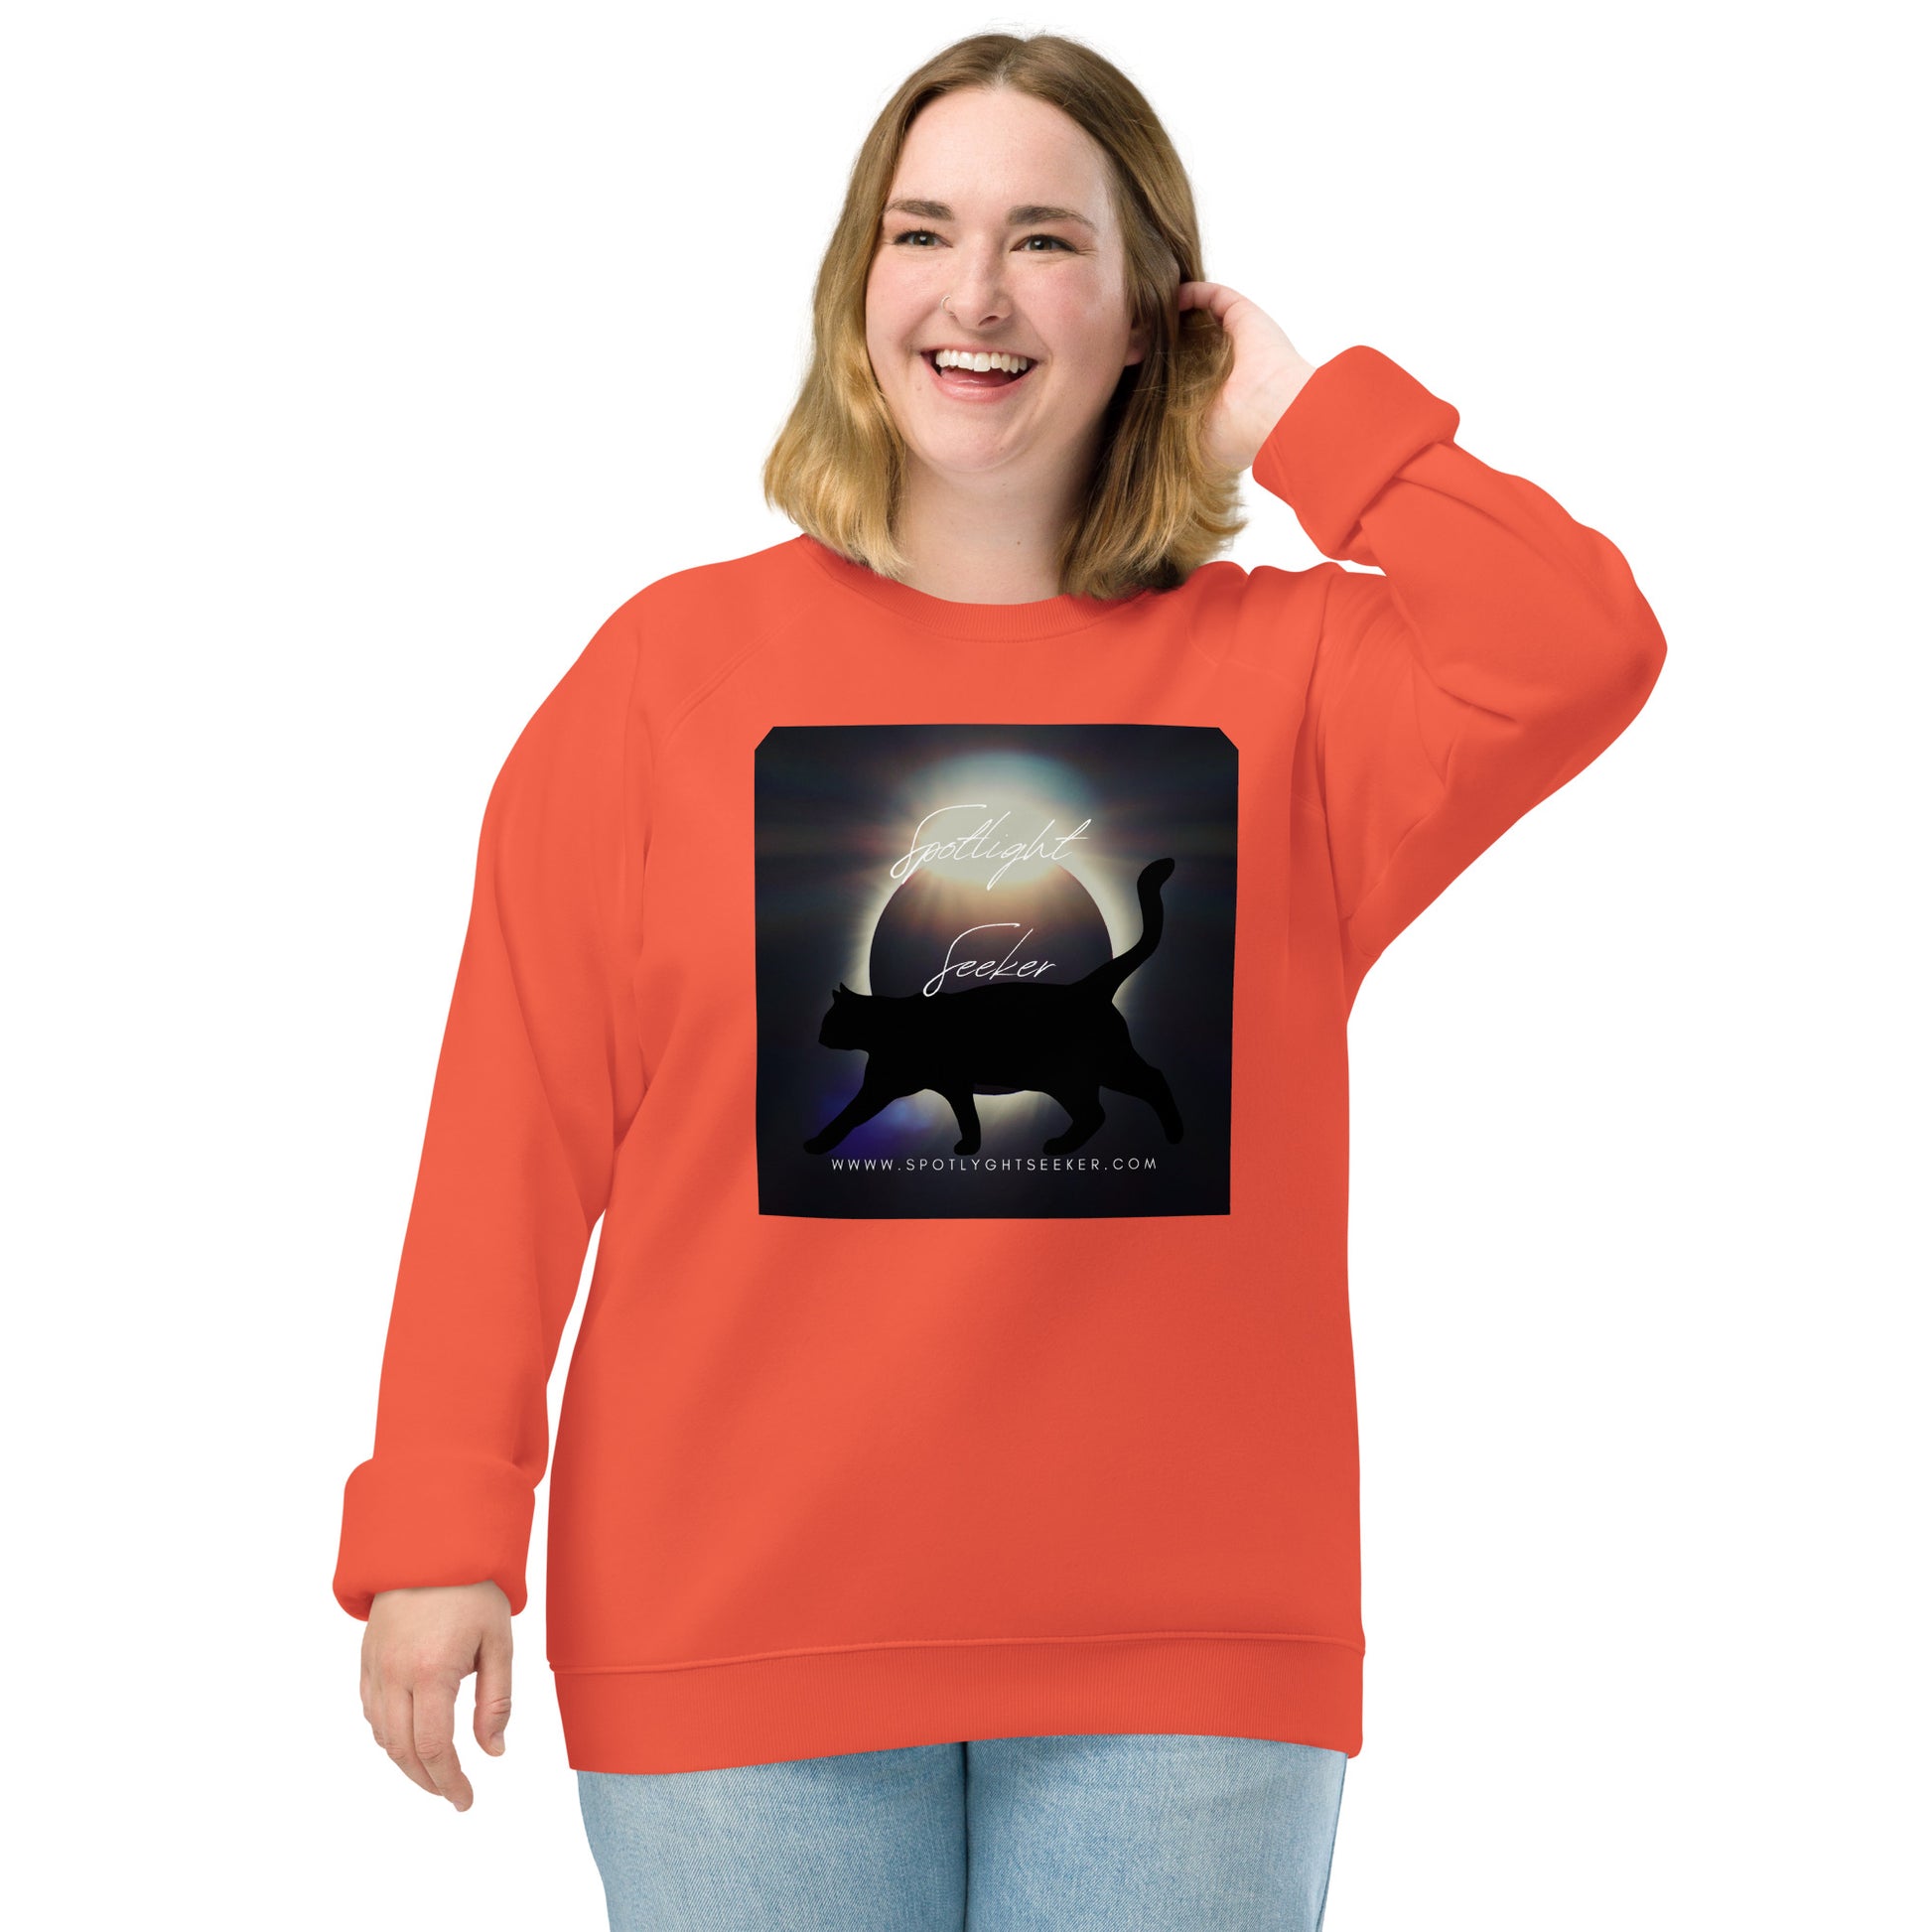 Image of the Cat Call Unisex Fitted Eco Sweatshirt - 'Strut' design, a comfortable and stylish sweatshirt capturing the essence of confident artists claiming their spotlight. Crafted from eco-friendly materials. 🎨💃 Plus Size Artist